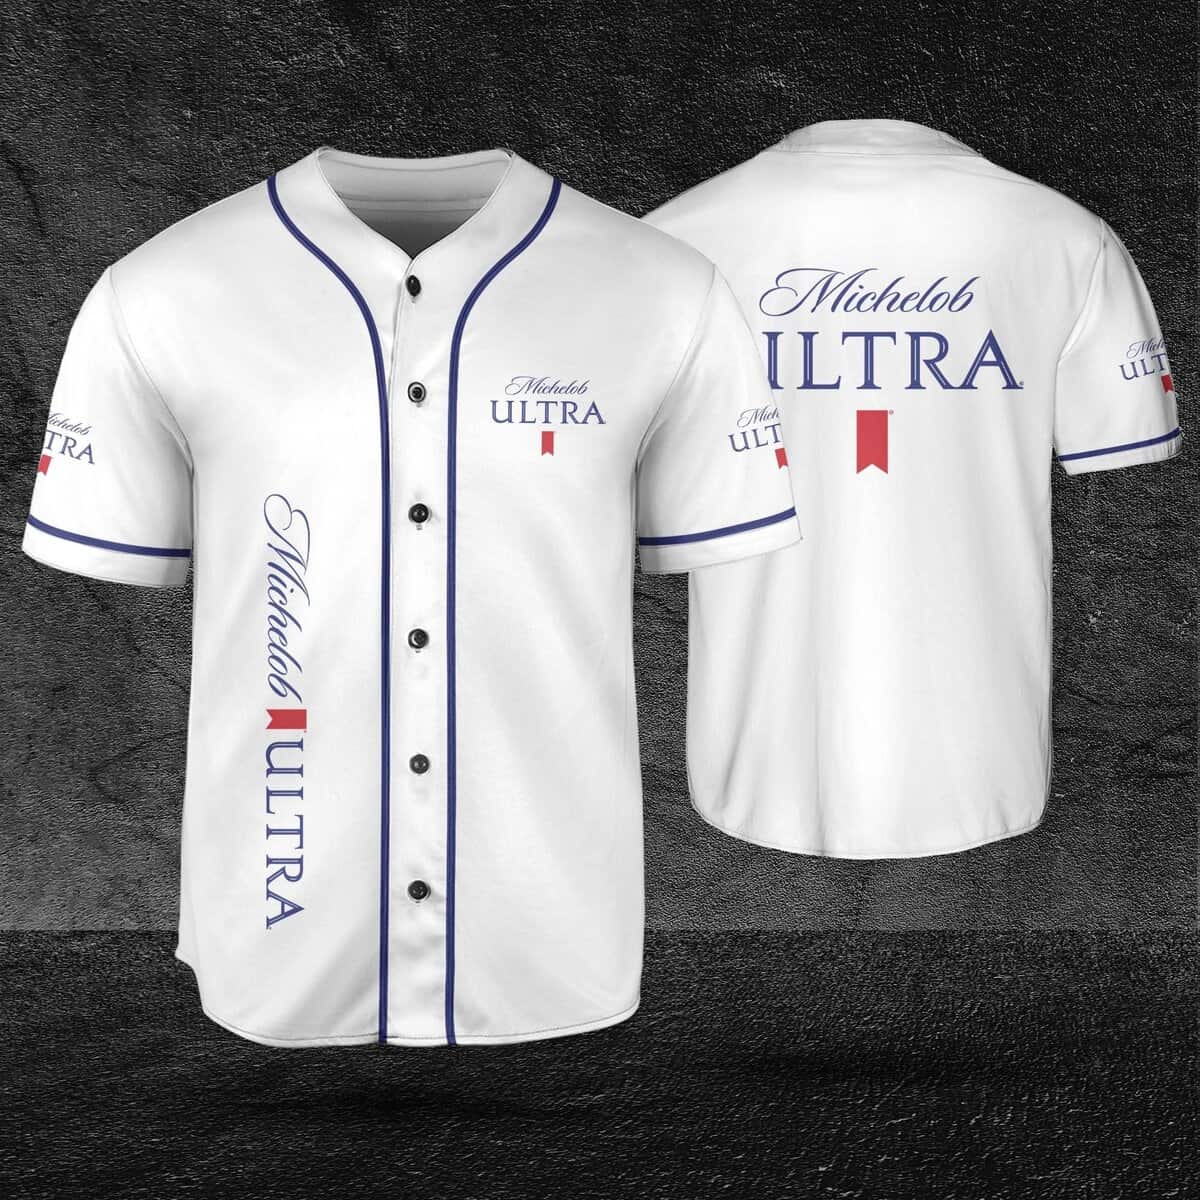 Classic White Michelob ULTRA Baseball Jersey Gift For Sports Fans